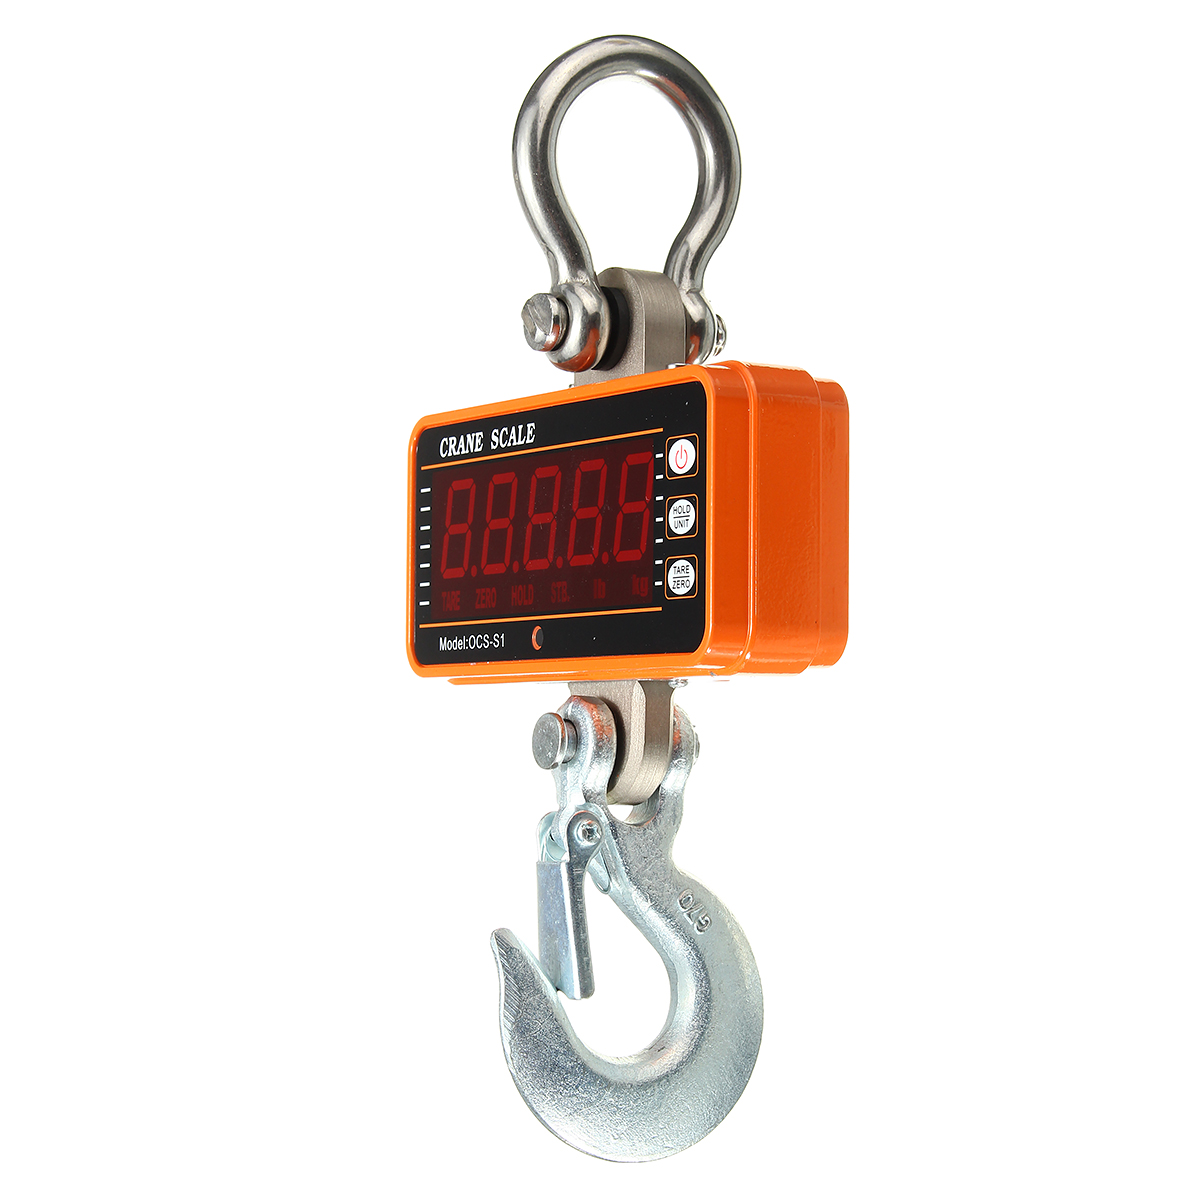 HUKOER Crane Scale 1000kg/2000lb Hanging Scale Digital Industrial Heavy Duty Crane Scale Smart High Accuracy Electronic Crane Scale RED